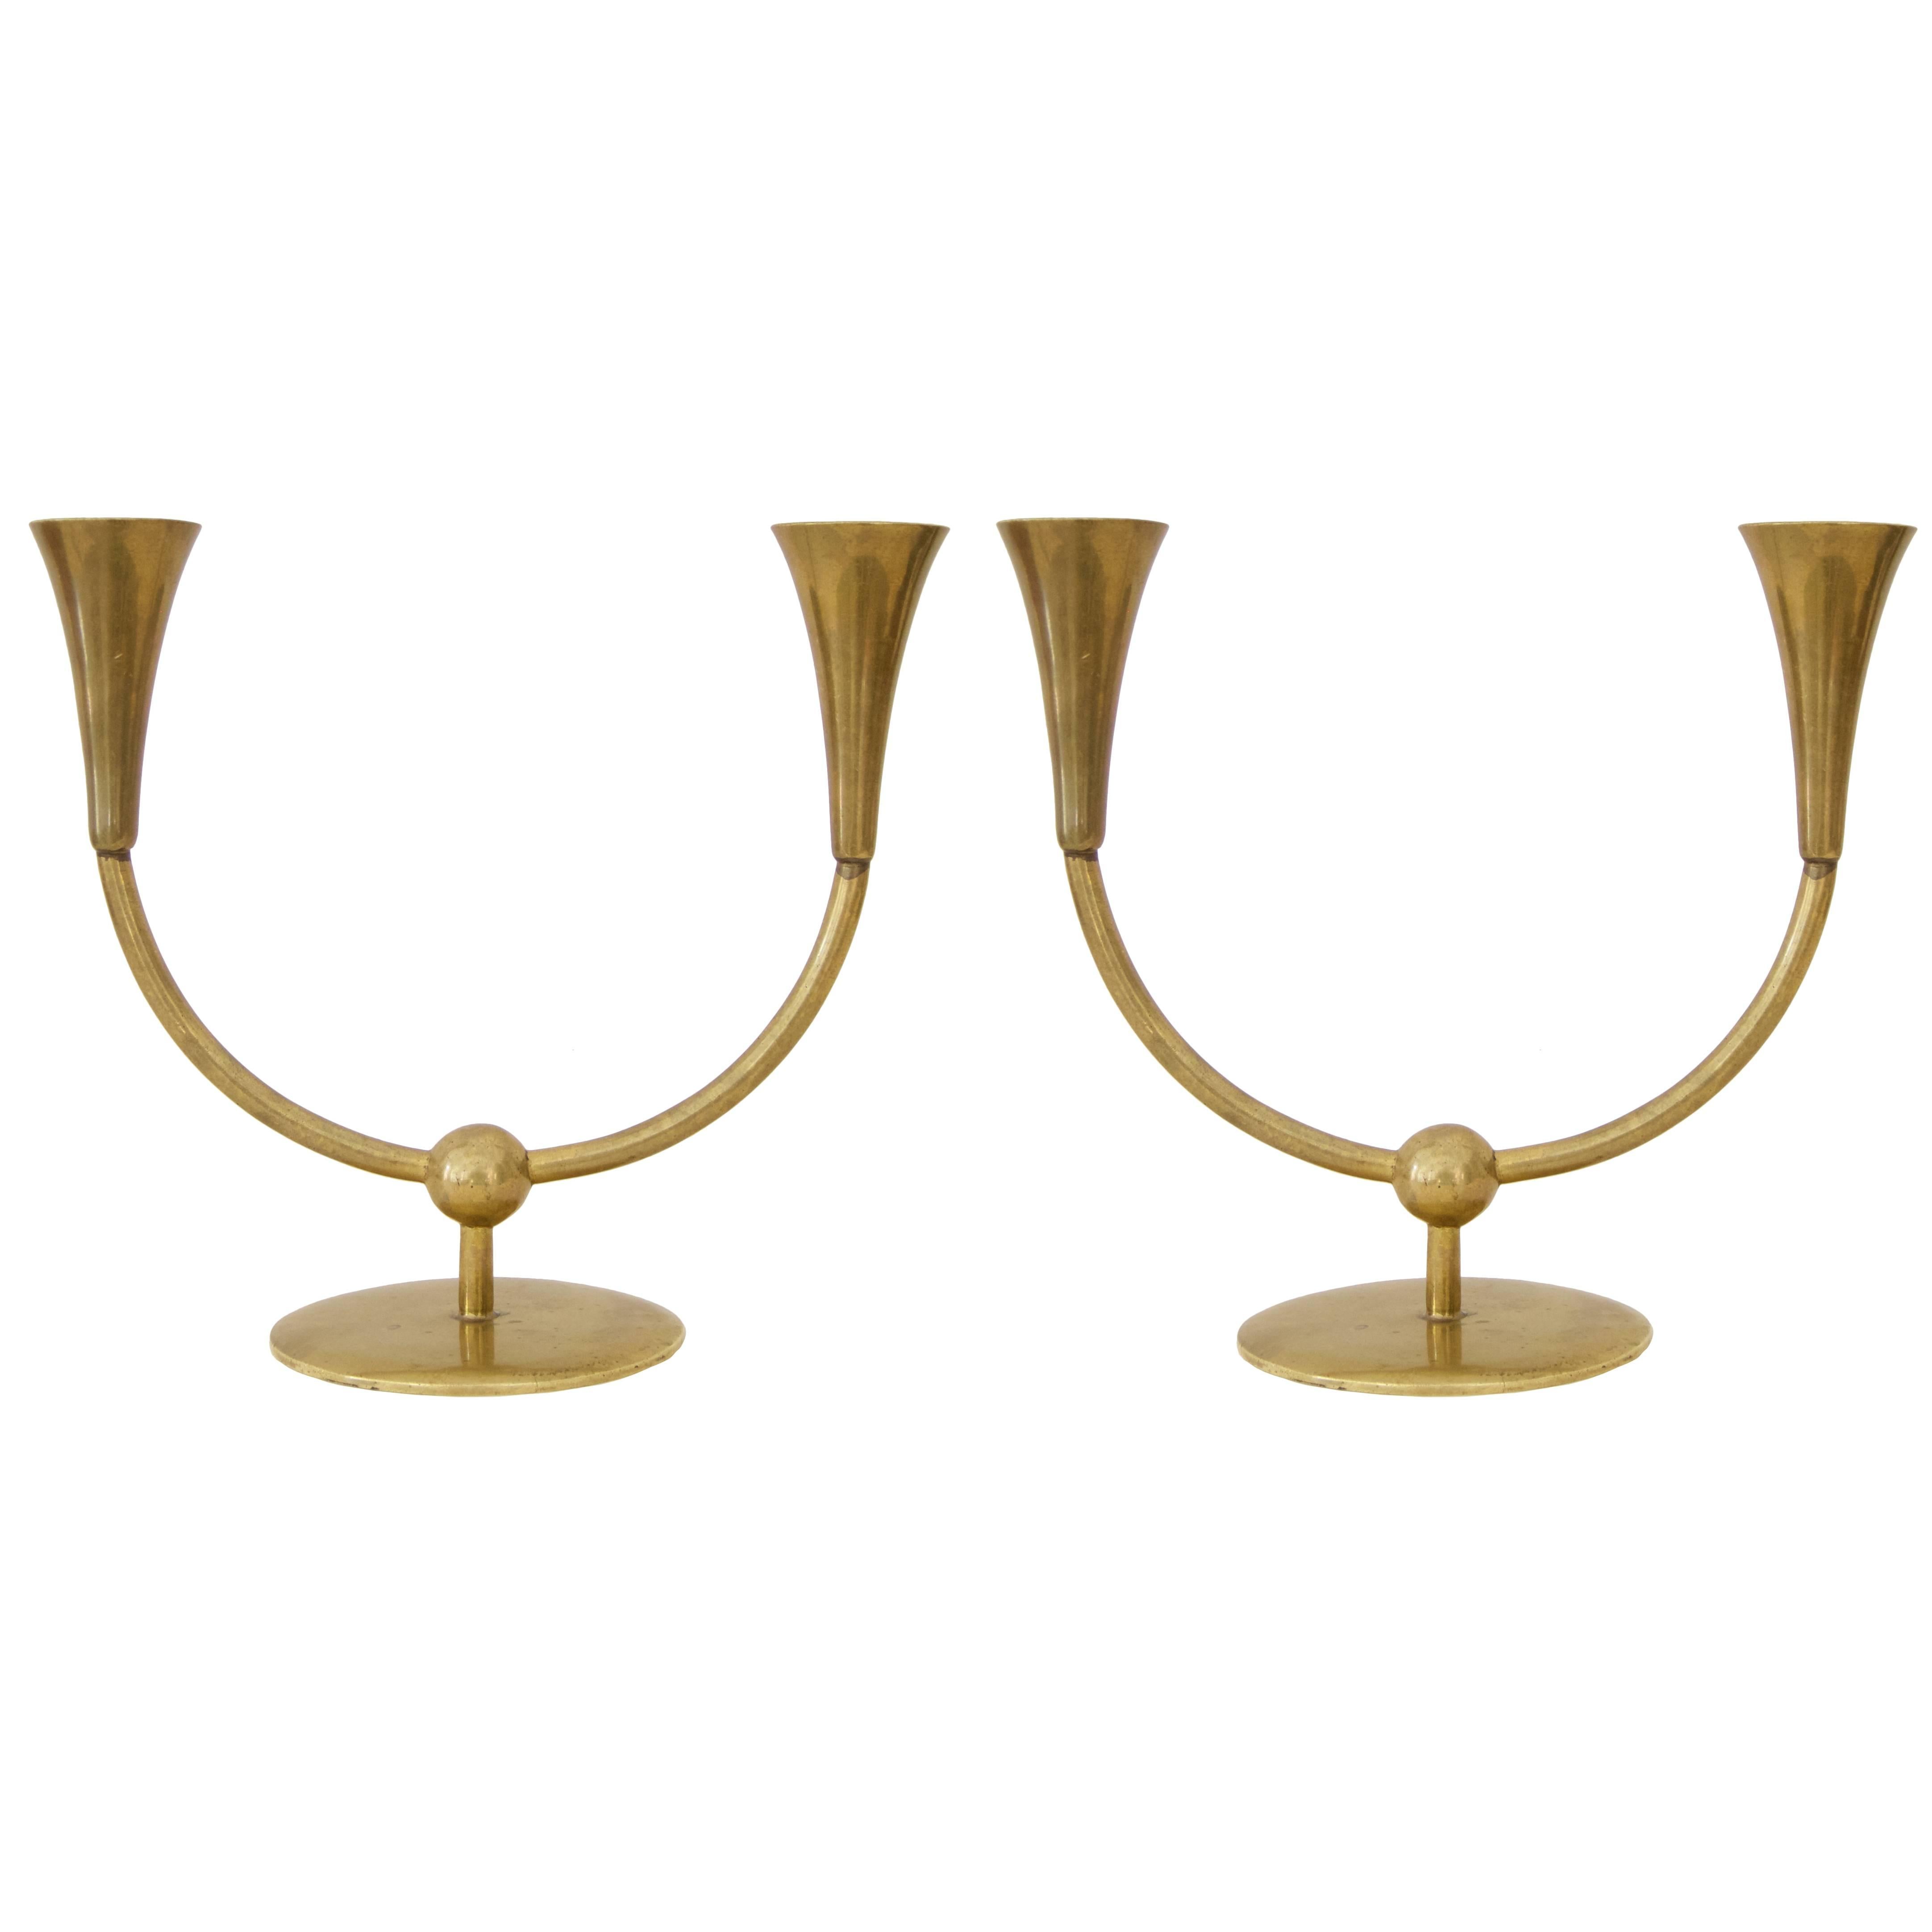 Pair of Two-Arm Candleholders by Richard Rohac For Sale